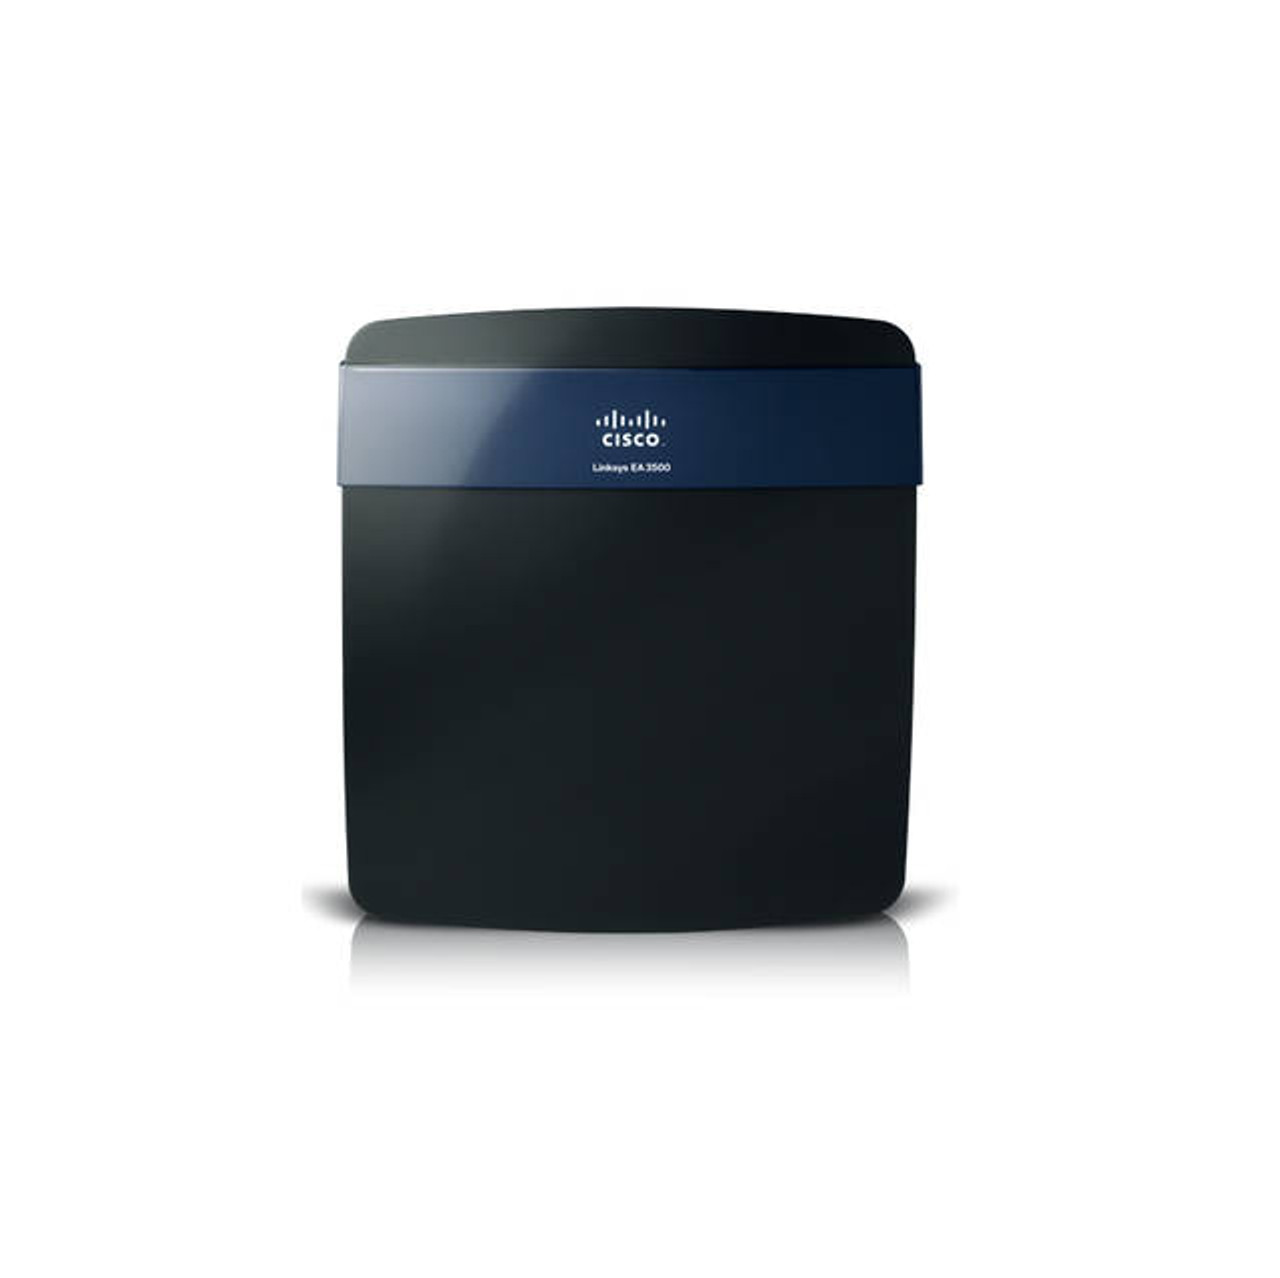 Linksys EA3500-NP Smart Wi-Fi App Enabled N750 Dual-Band Wireless Router w/ Gigabit and USB